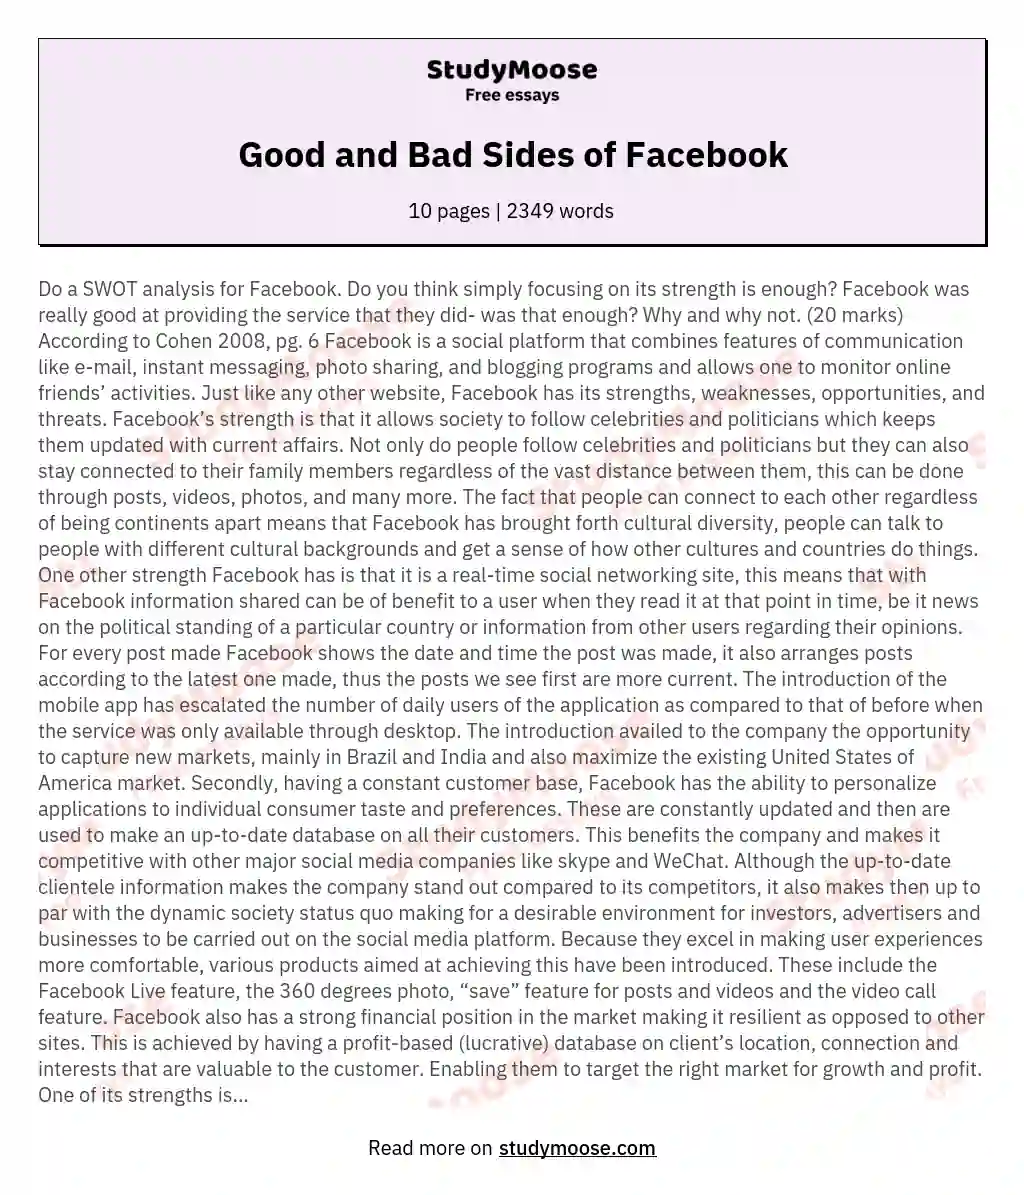 Good and Bad Sides of Facebook essay